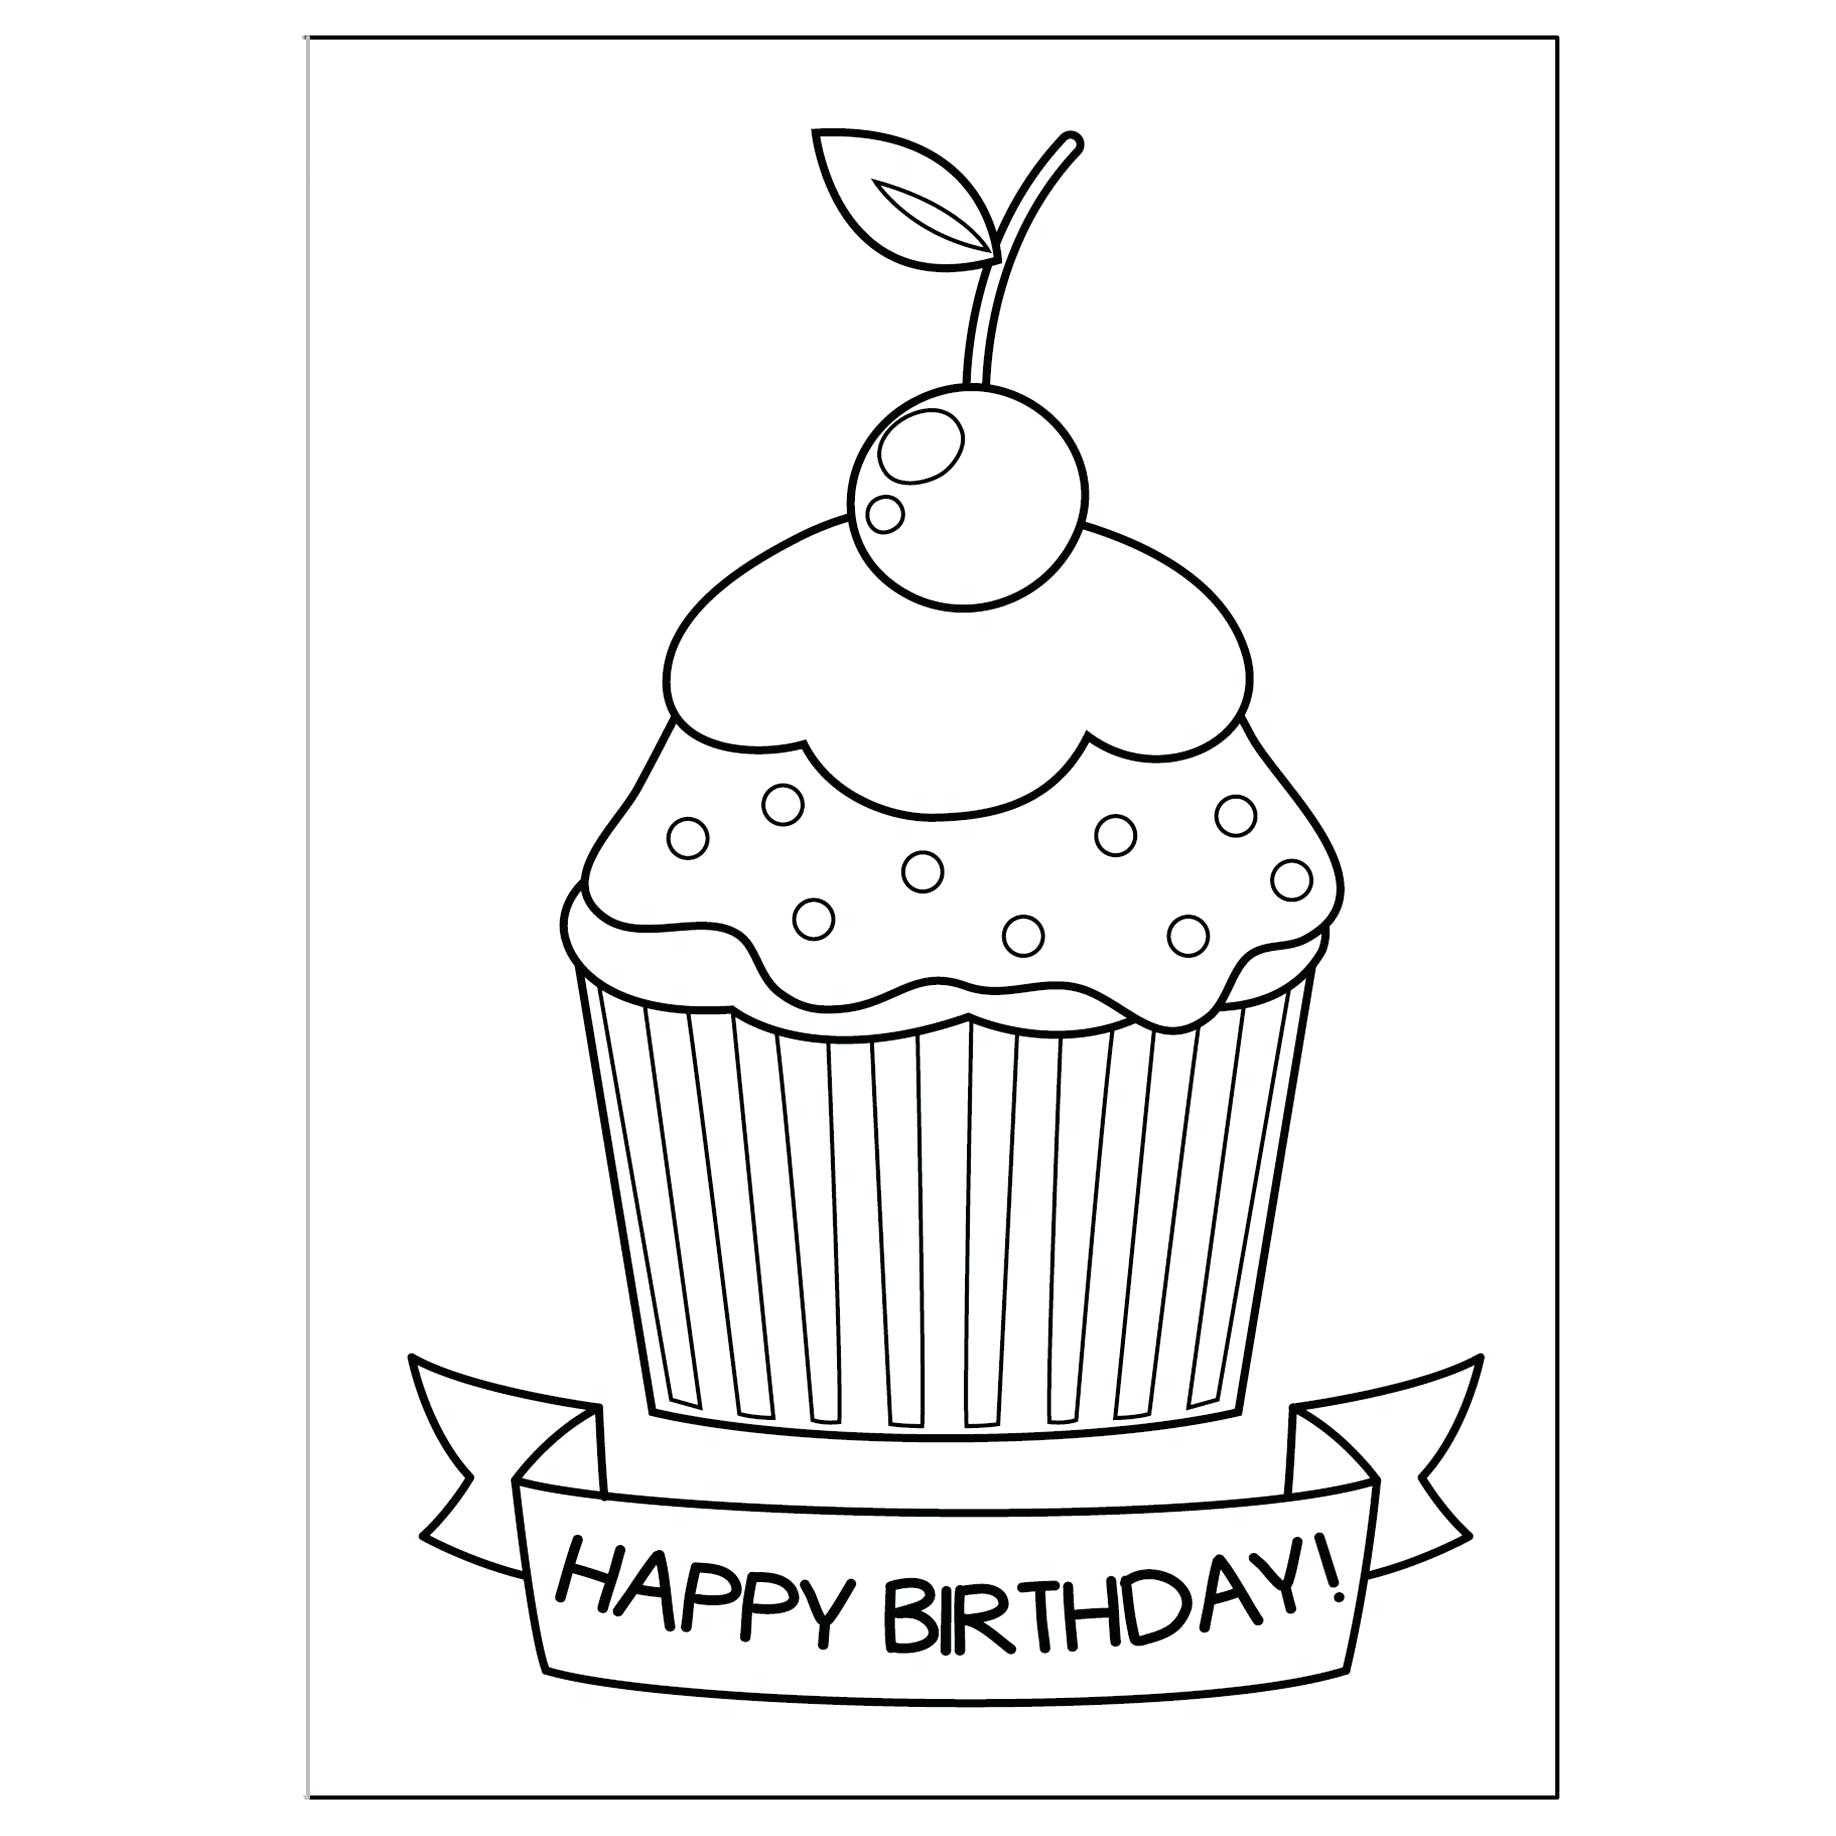 coloring-printable-coloring-birthday-card-for-mom-funny-intended-for